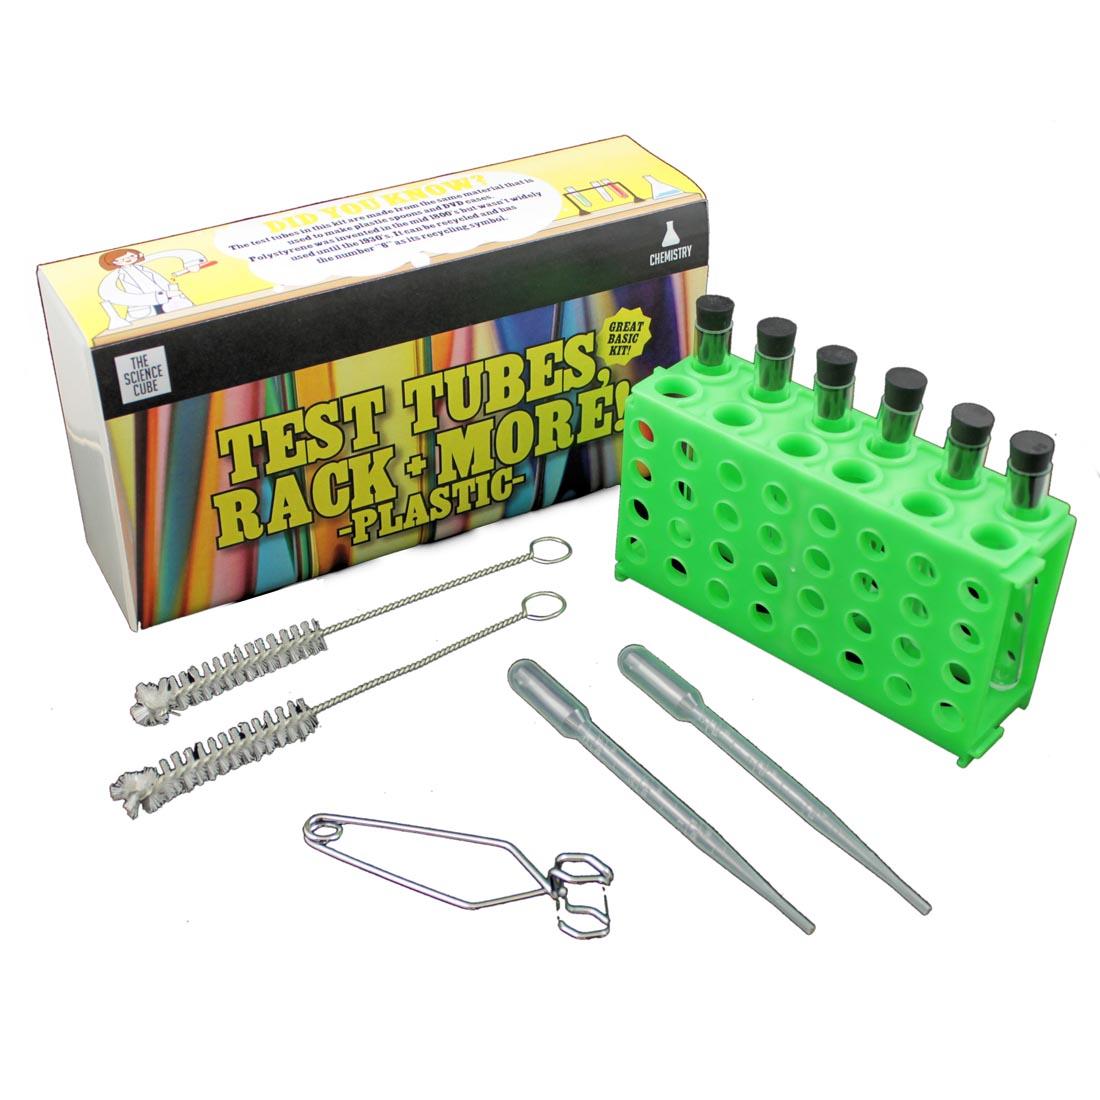 Components of The Science Cube Plastic Test Tubes, Rack and More Kit include plastic test tubes, tube rack, tongs, pipettes and test tube brushes